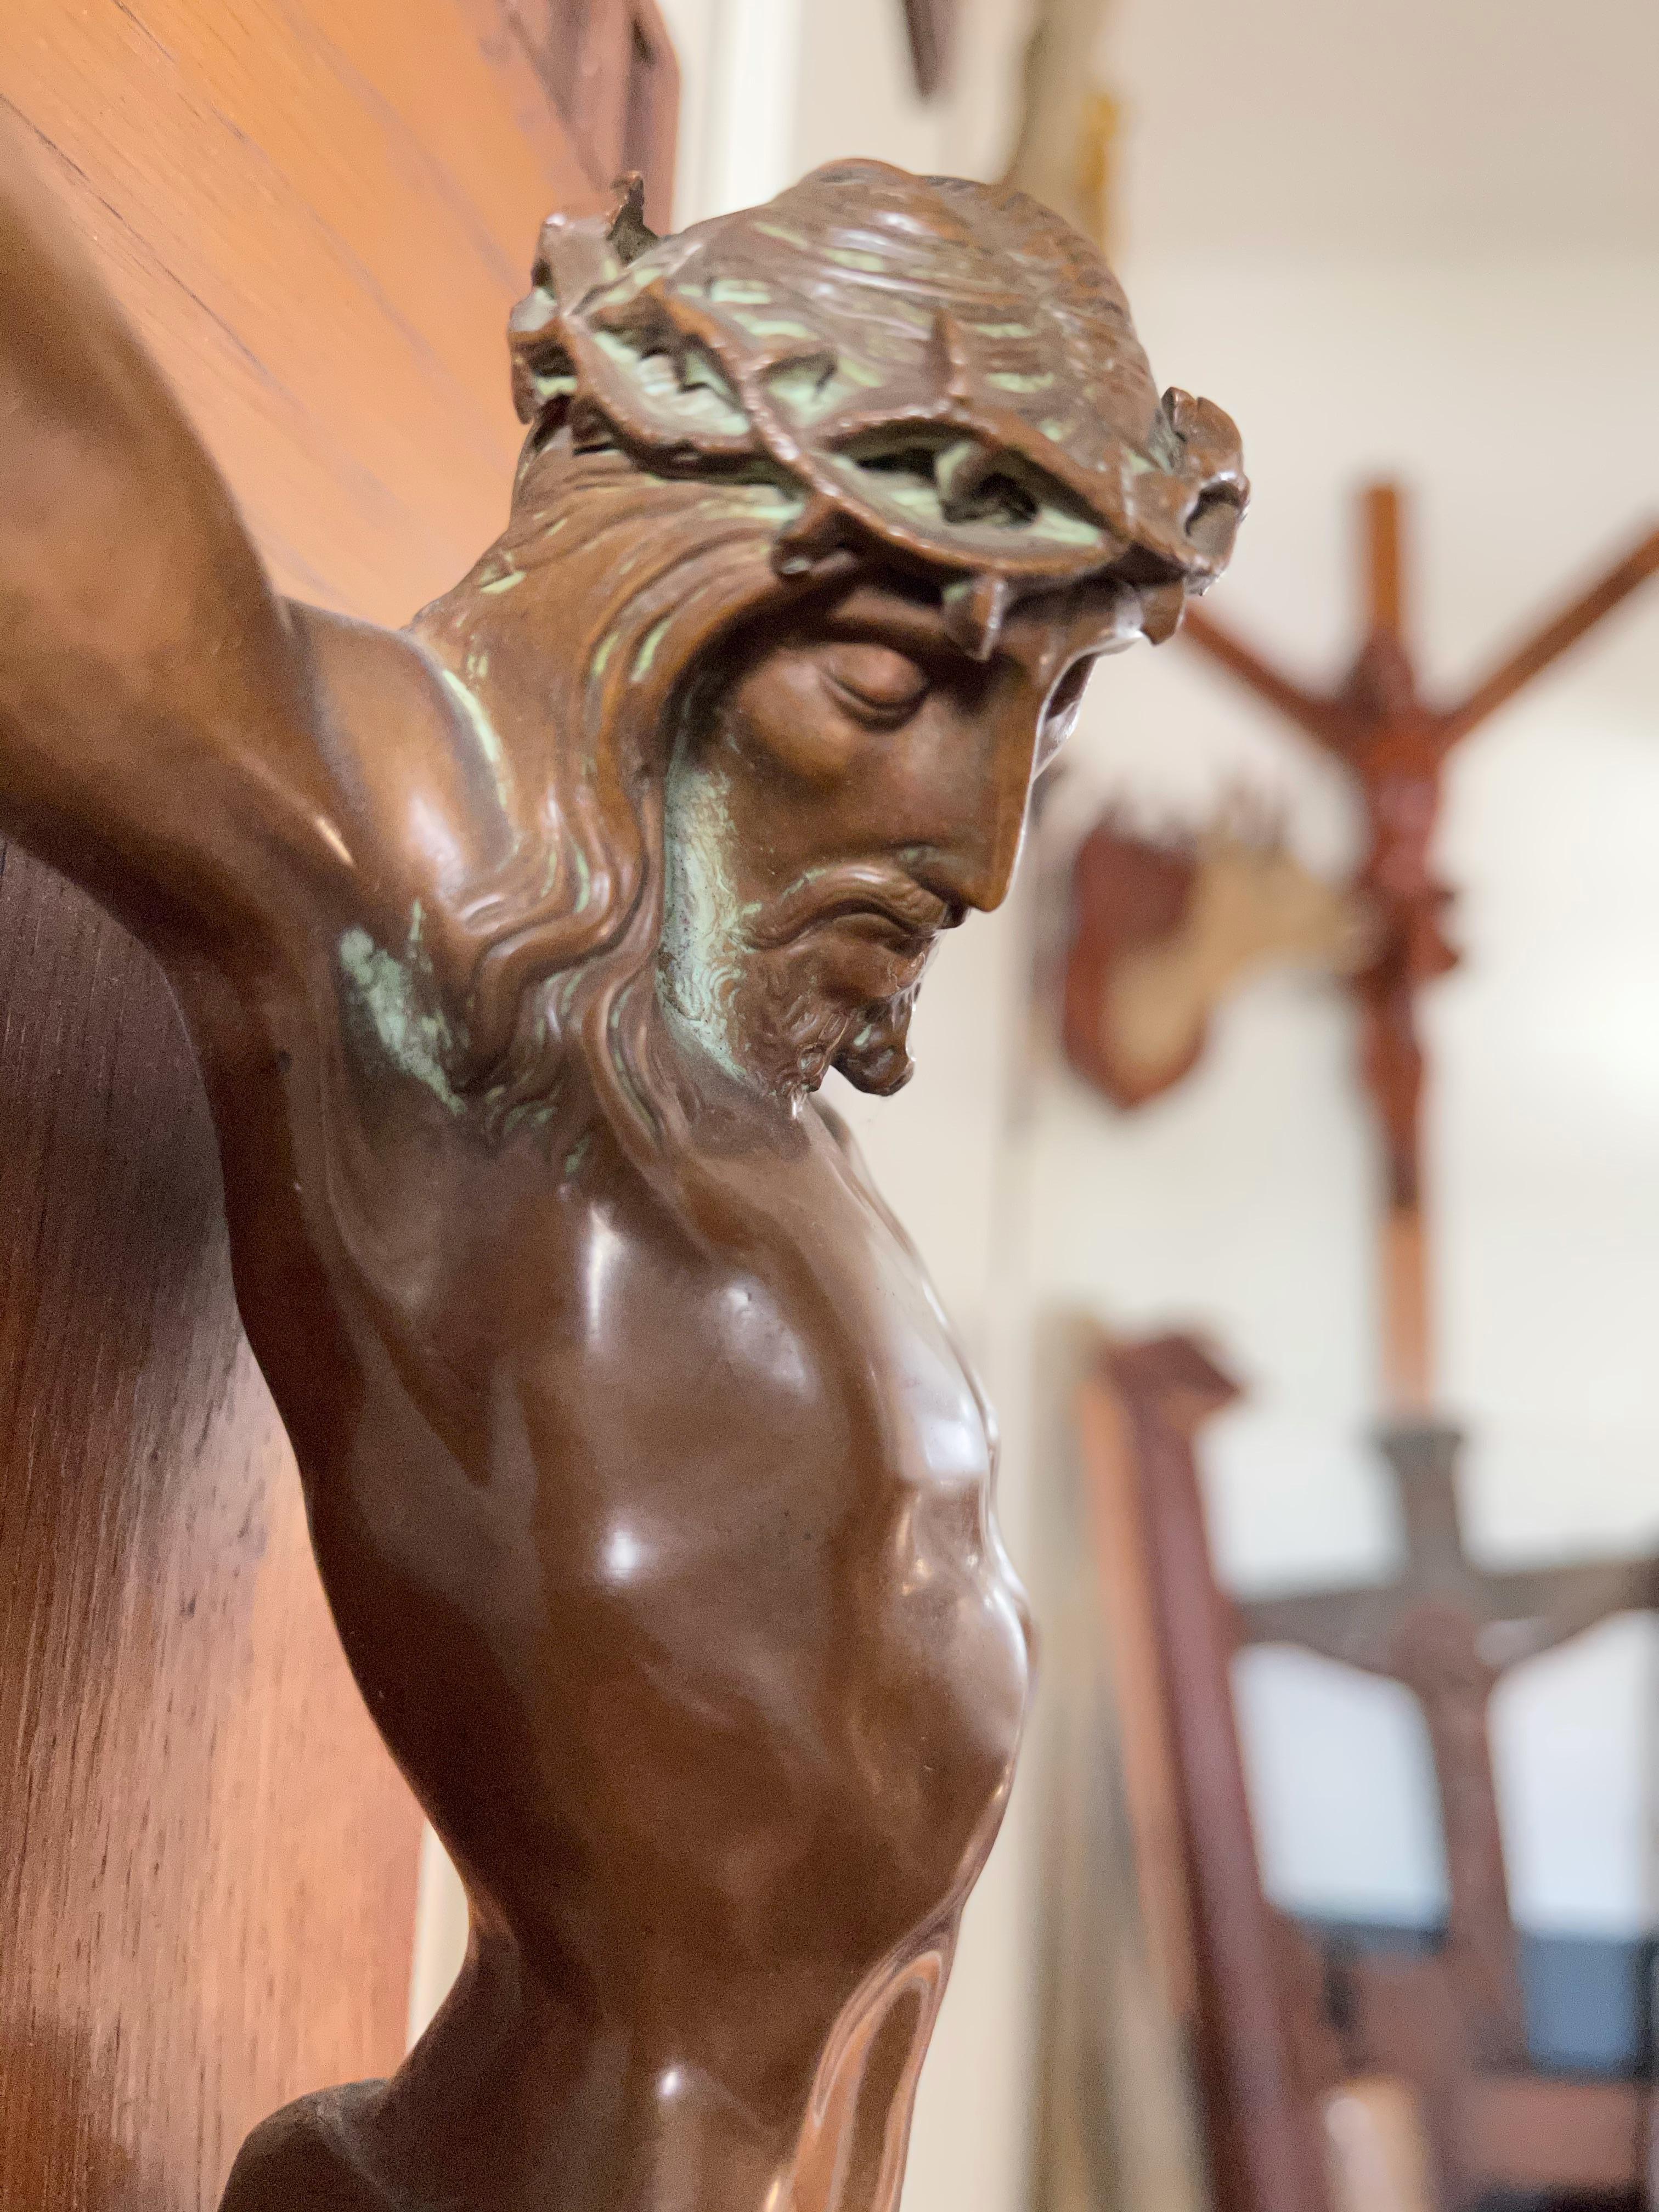 Stylish and meaningful fine work of art.

This Christian work of art dates from the 1920s. Over the centuries wall crucifixes have been made in all kinds of sizes and shapes, but the ones from the Art Deco era seem to be the most distinctive in